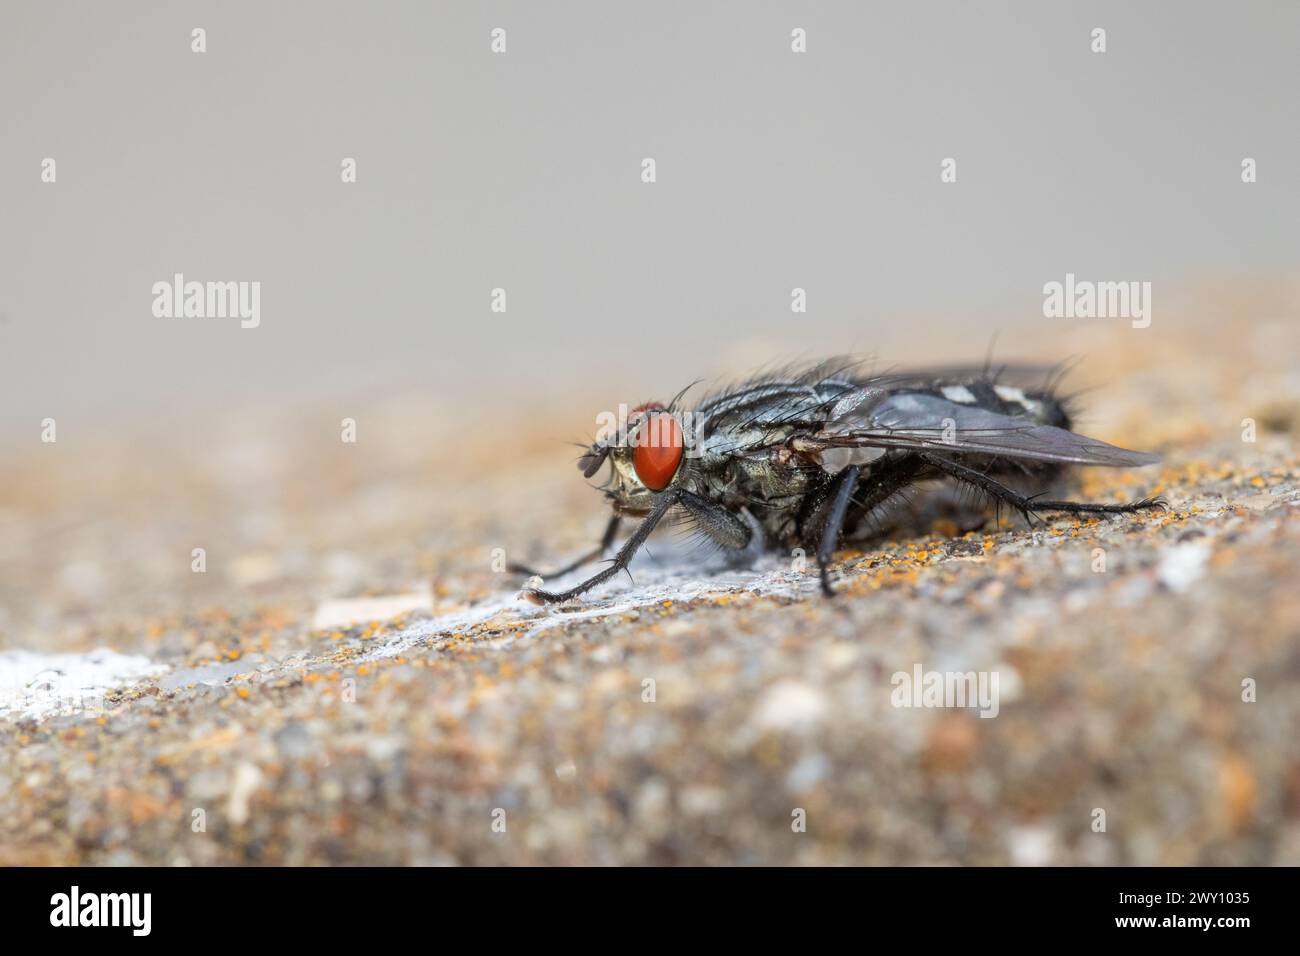 Close-up of a Flesh-Fly (Sarcophaga carnaria) on concrete Stock Photo